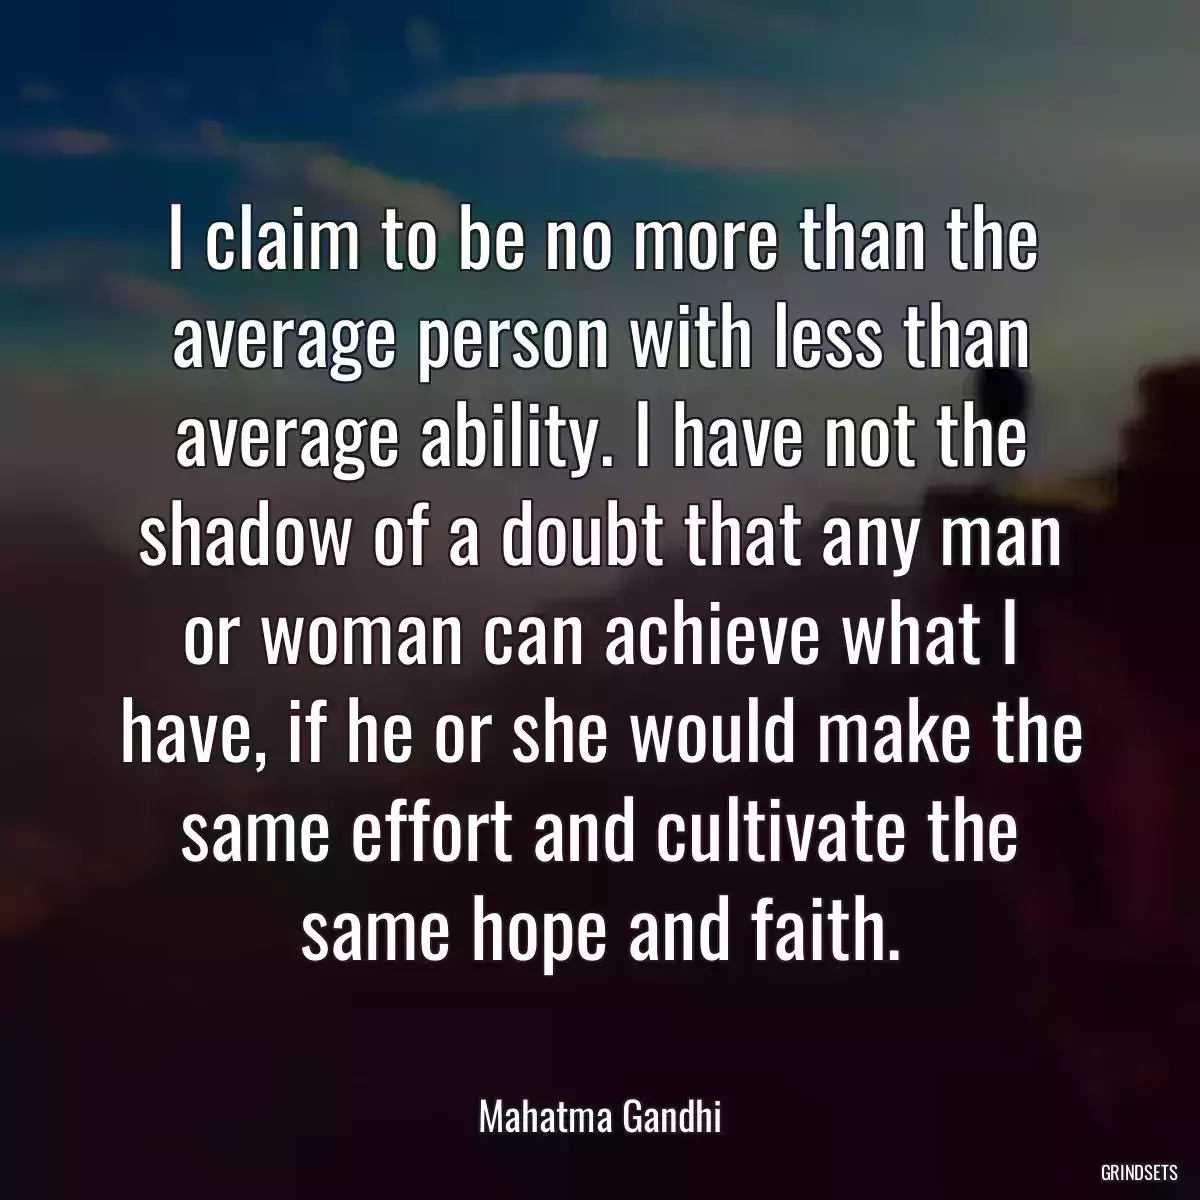 I claim to be no more than the average person with less than average ability. I have not the shadow of a doubt that any man or woman can achieve what I have, if he or she would make the same effort and cultivate the same hope and faith.